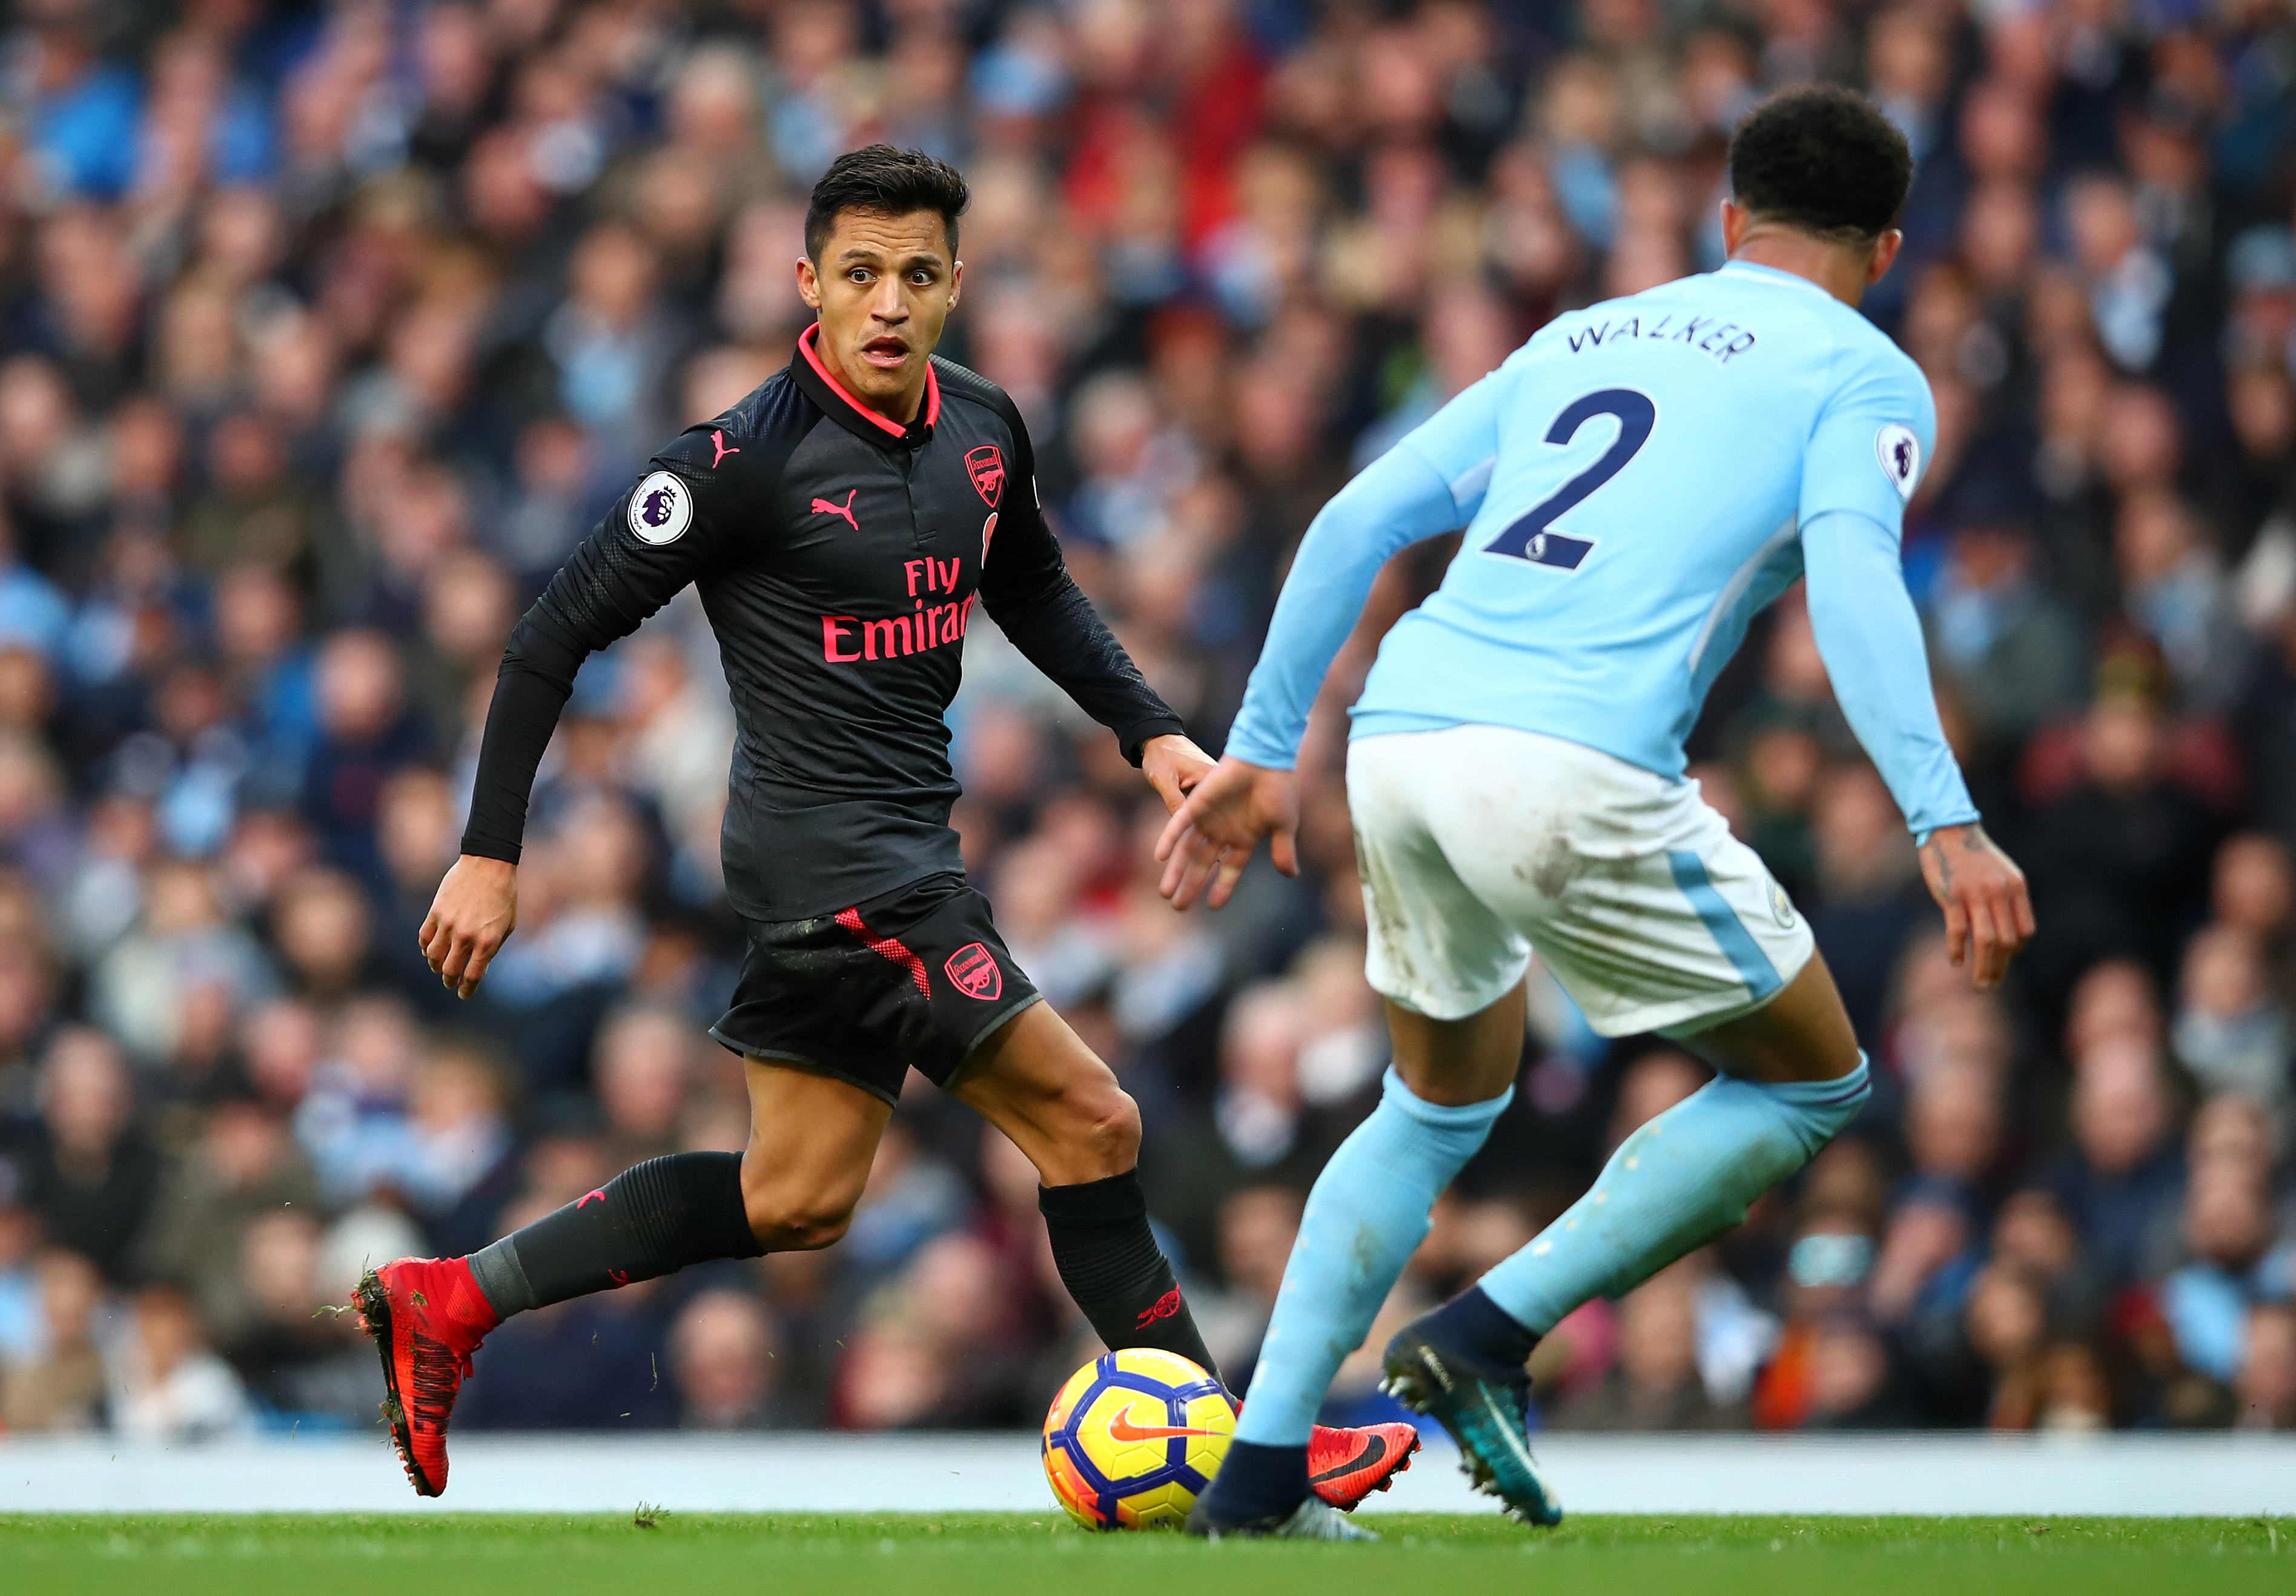 MANCHESTER, ENGLAND - NOVEMBER 05: Alexis Sanchez of Arsenal in action during the Premier League match between Manchester City and Arsenal at Etihad Stadium on November 5, 2017 in Manchester, England.  (Photo by Clive Brunskill/Getty Images)